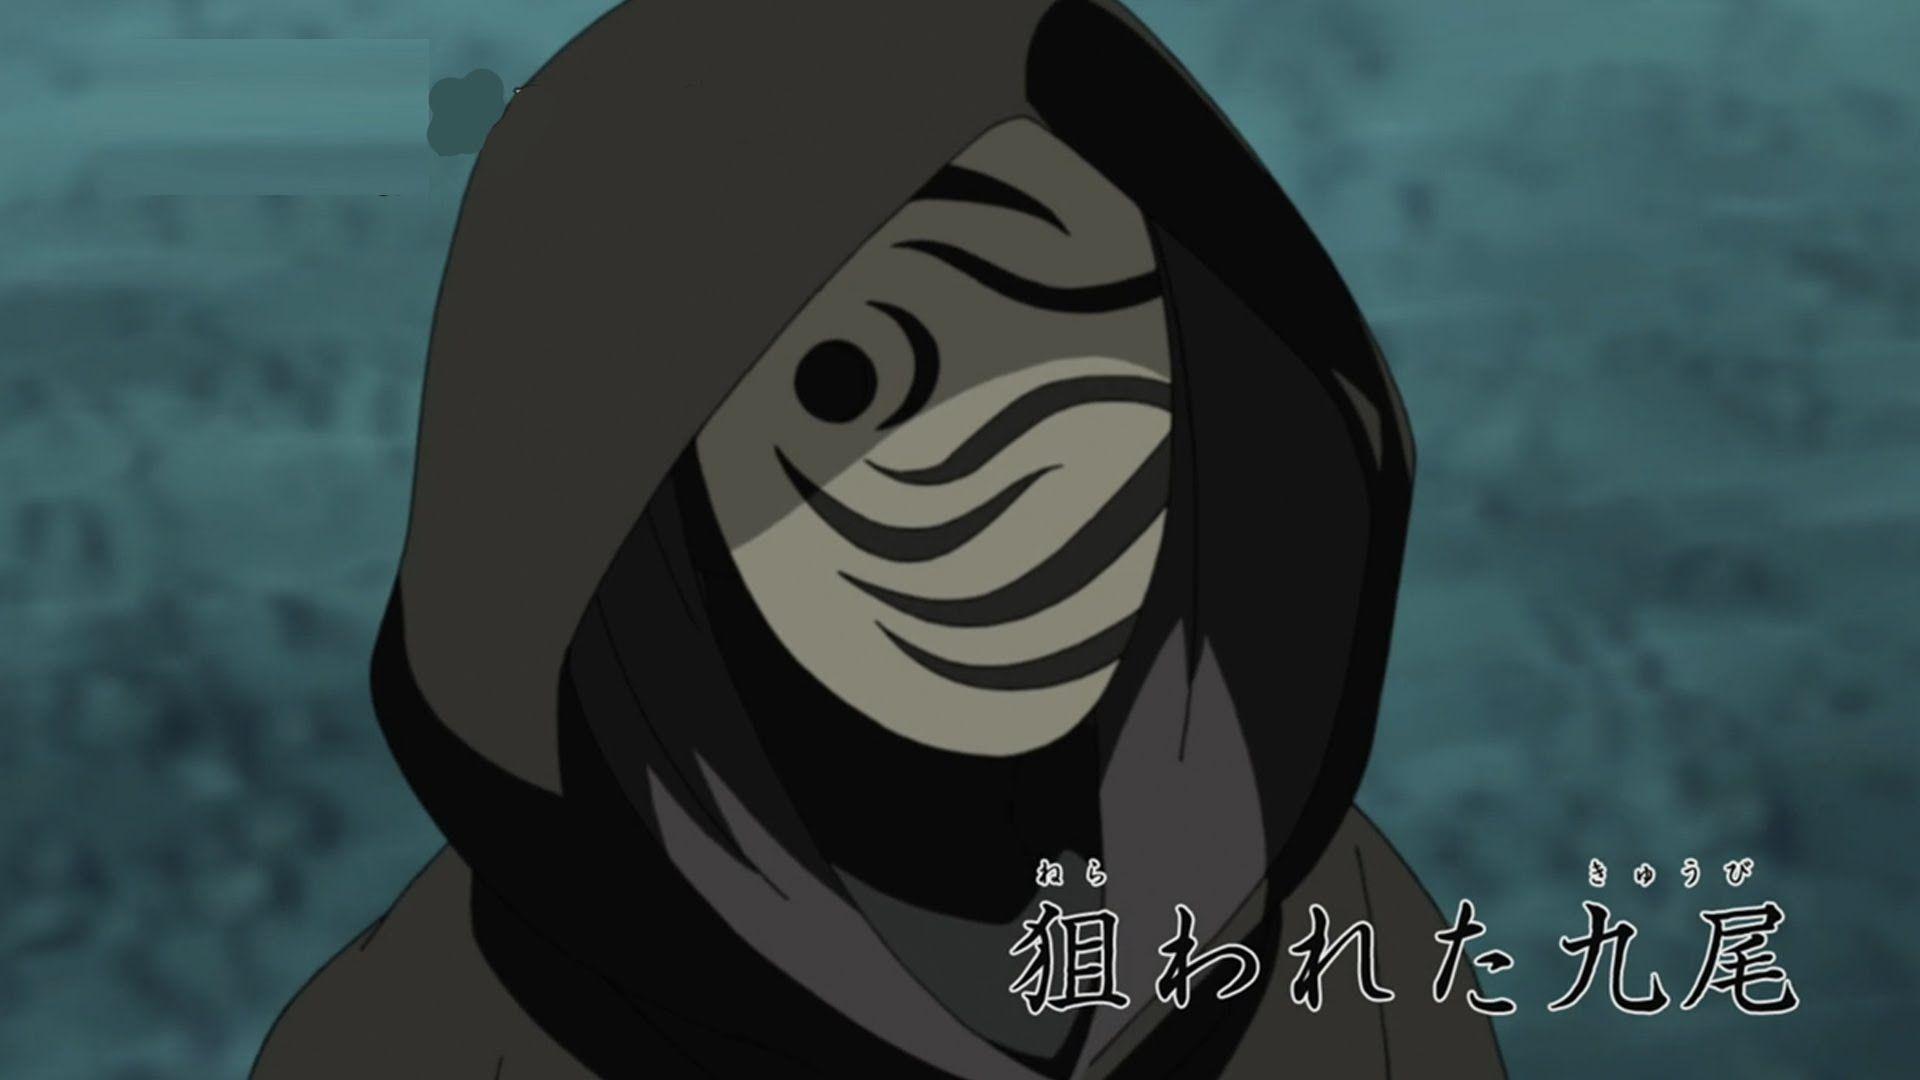 Naruto Shippuden Episode 247 Preview Discussion- The Masked Man From